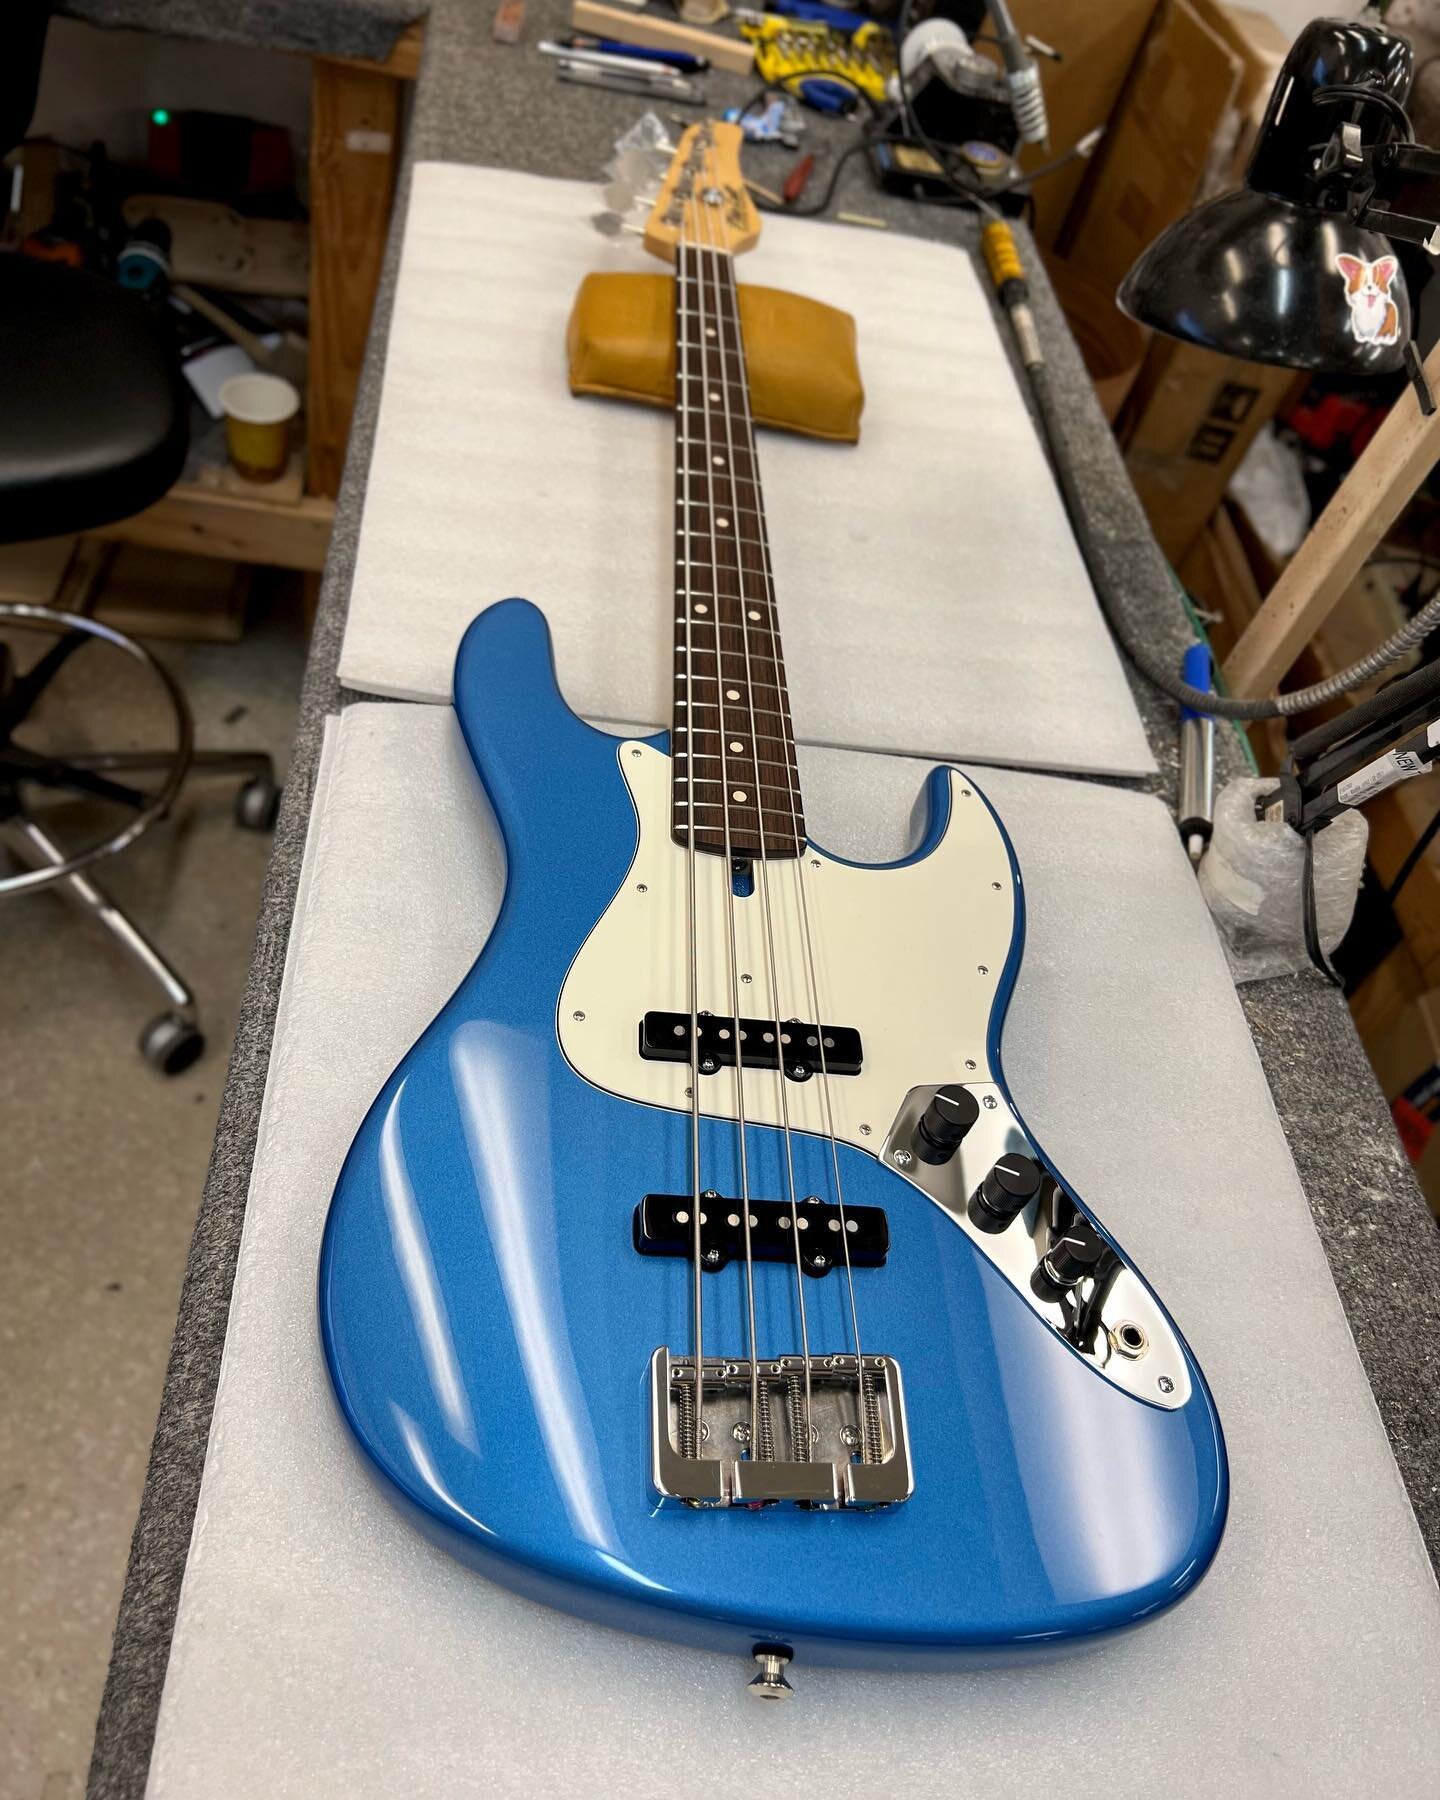 The first Custom-Ordered J430 in Lake Placid Blue, done!  This bass was built at the same time as the prototype because the owner wanted one so badly! 😎🔥🔥🔥

#madeinusa #bass #bassguitar #guitar #bassporn #classic #bassplayer #mikelull #mikelullba